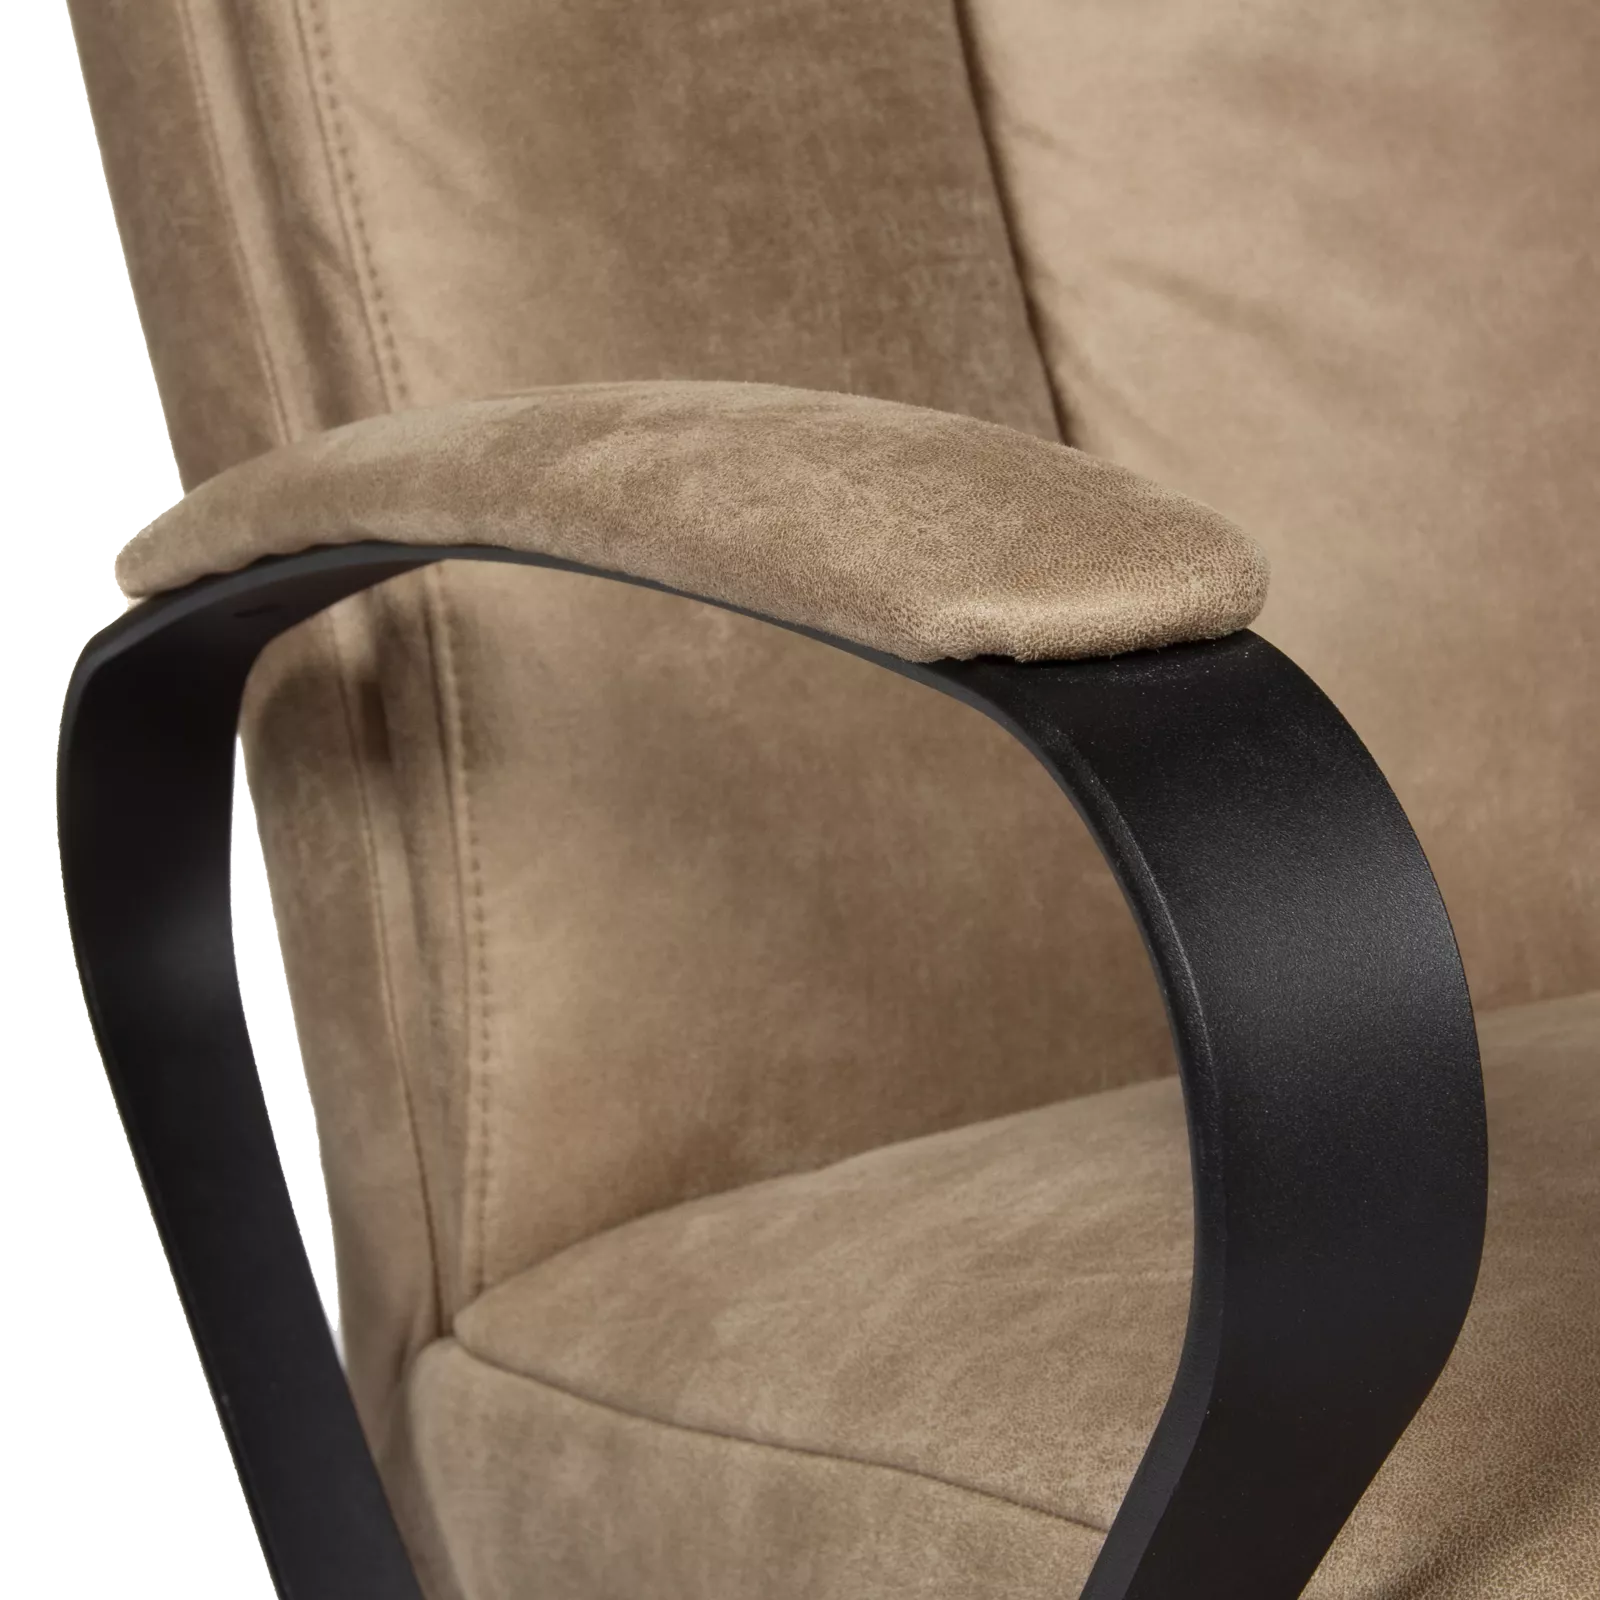 Relaxfauteuil (large - handmatig) Cuno - Tex Bull Liver